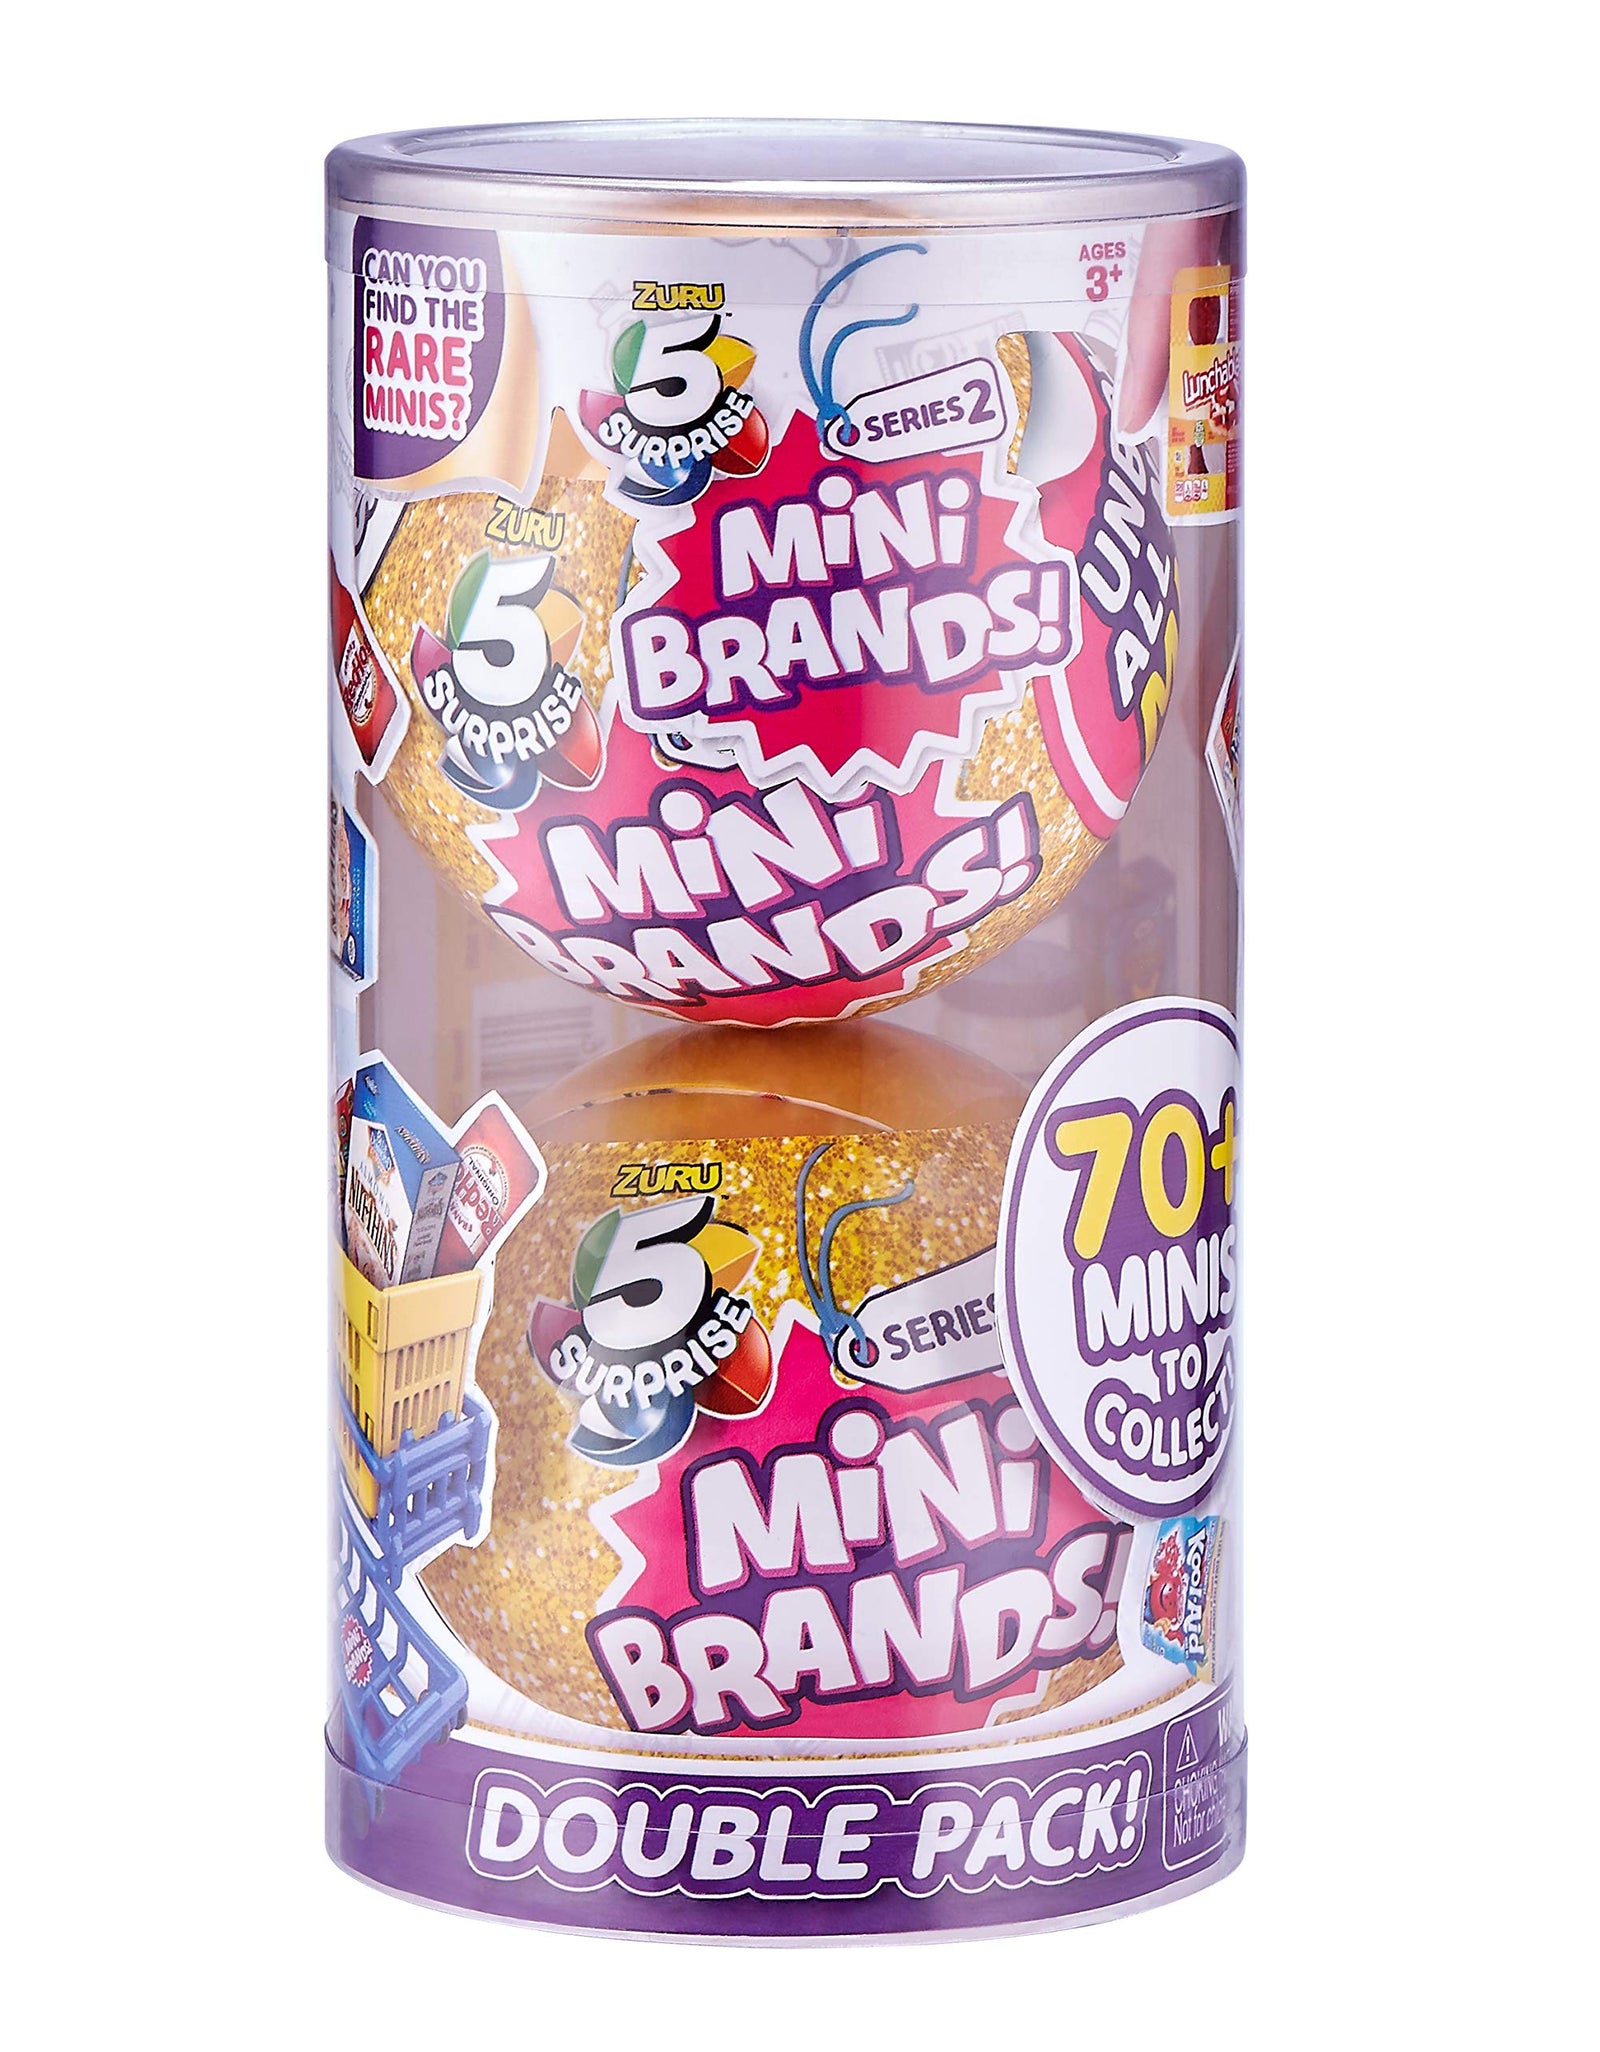 5 Surprise Mini Brands Mystery Capsule Real Miniature Brands Collectible Toy (2 Pack) (PVC Tube Packaging) by ZURU, Gold